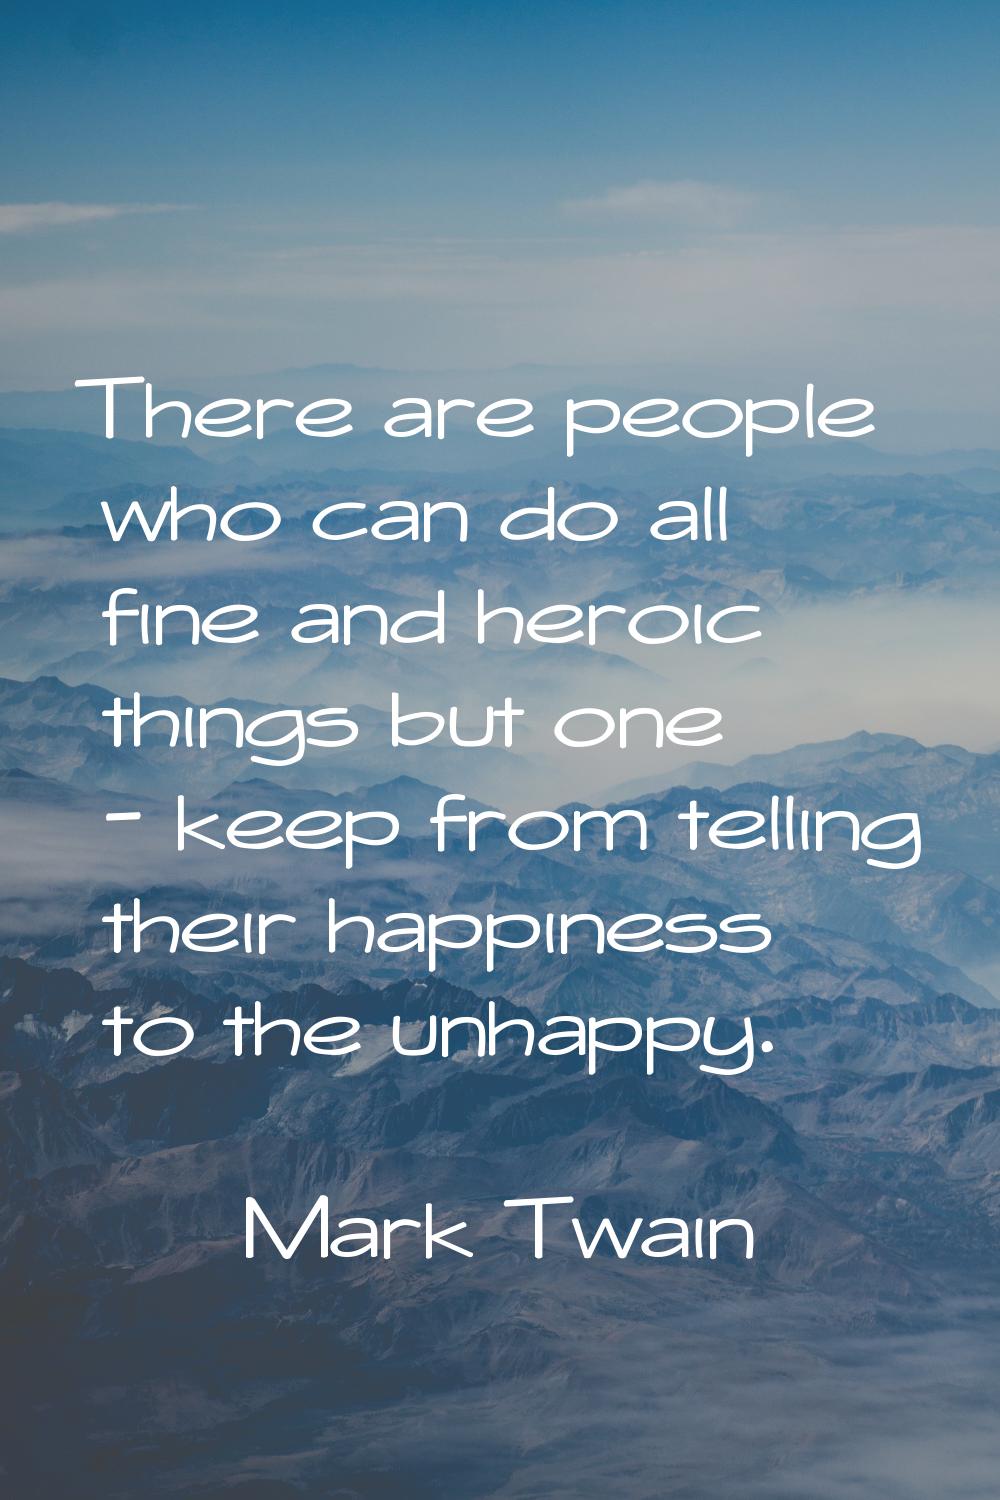 There are people who can do all fine and heroic things but one - keep from telling their happiness 